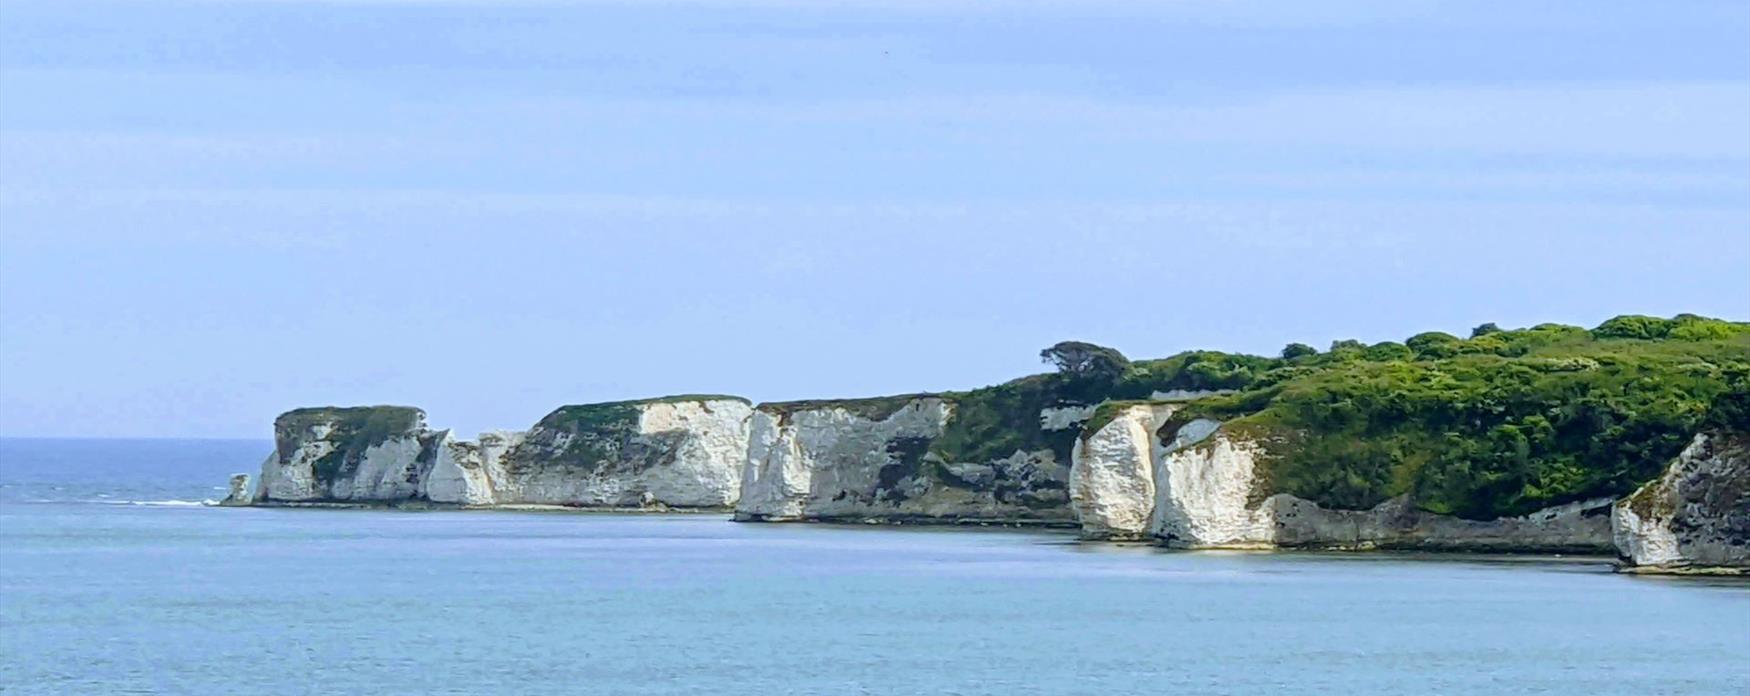 A distant view across the bright blue sea of large white chalk cliffs, topped with green grass, ending in the sea stacks of Old Harry Rocks. The sea is bright blue and glistening in the sun.